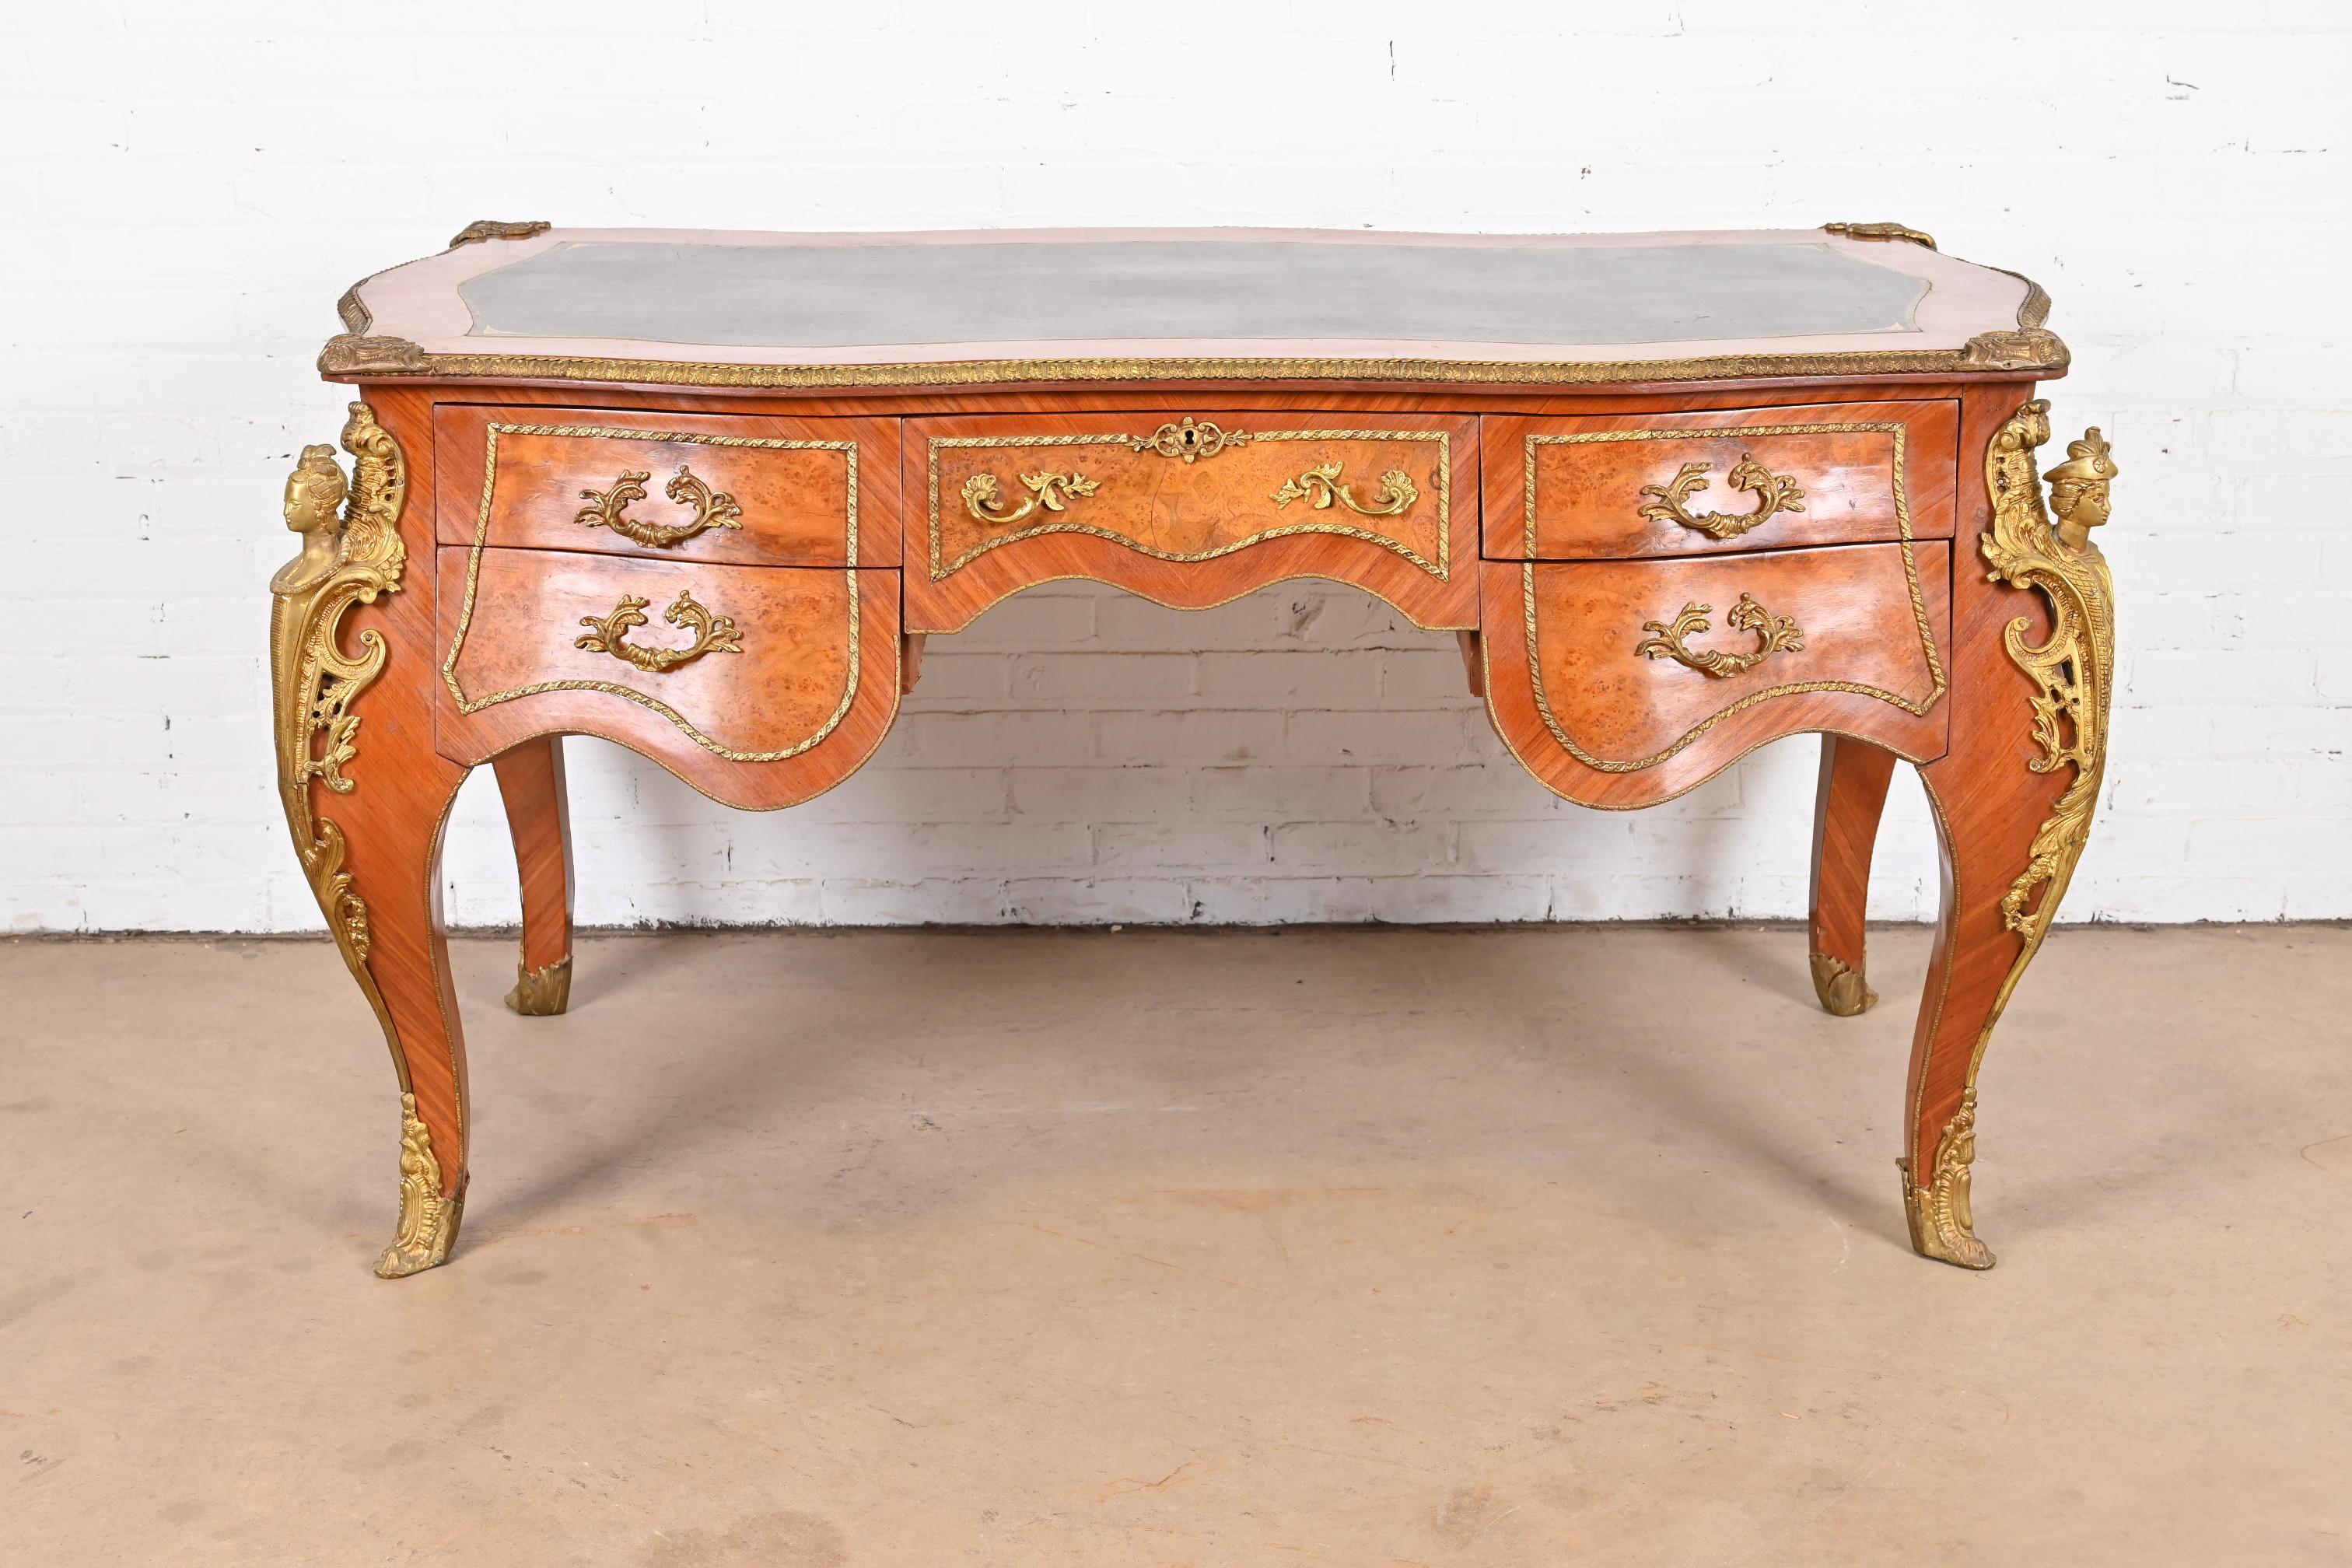 An outstanding French Louis XV style executive writing desk or bureau plat desk

France, circa Early 20th century

Kingwood and burled walnut, with bronze trim and ornate ormolu mounts, and embossed black leather top.

Measures: 67